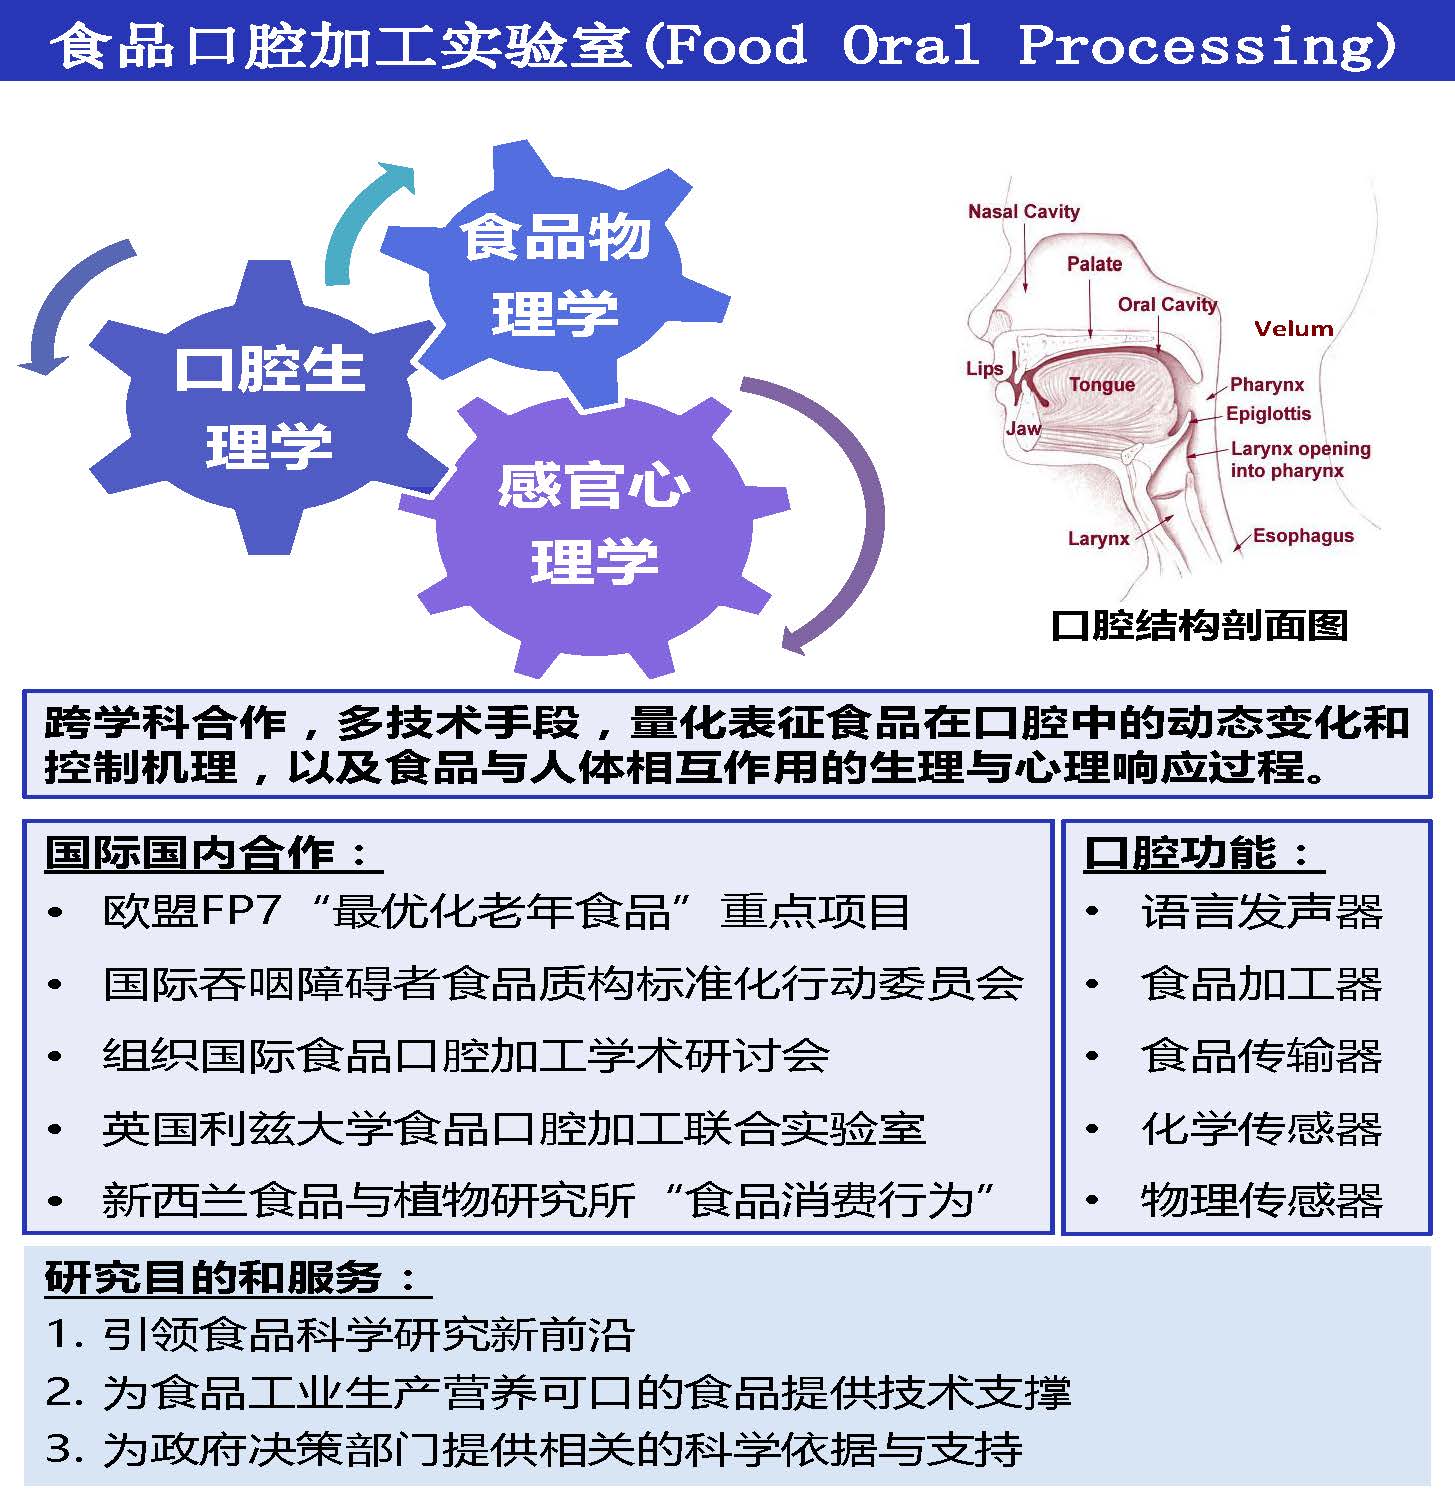 Food Oral Processing Lab Poster Xinmiao Aug 9, 2017_Page_3.jpg